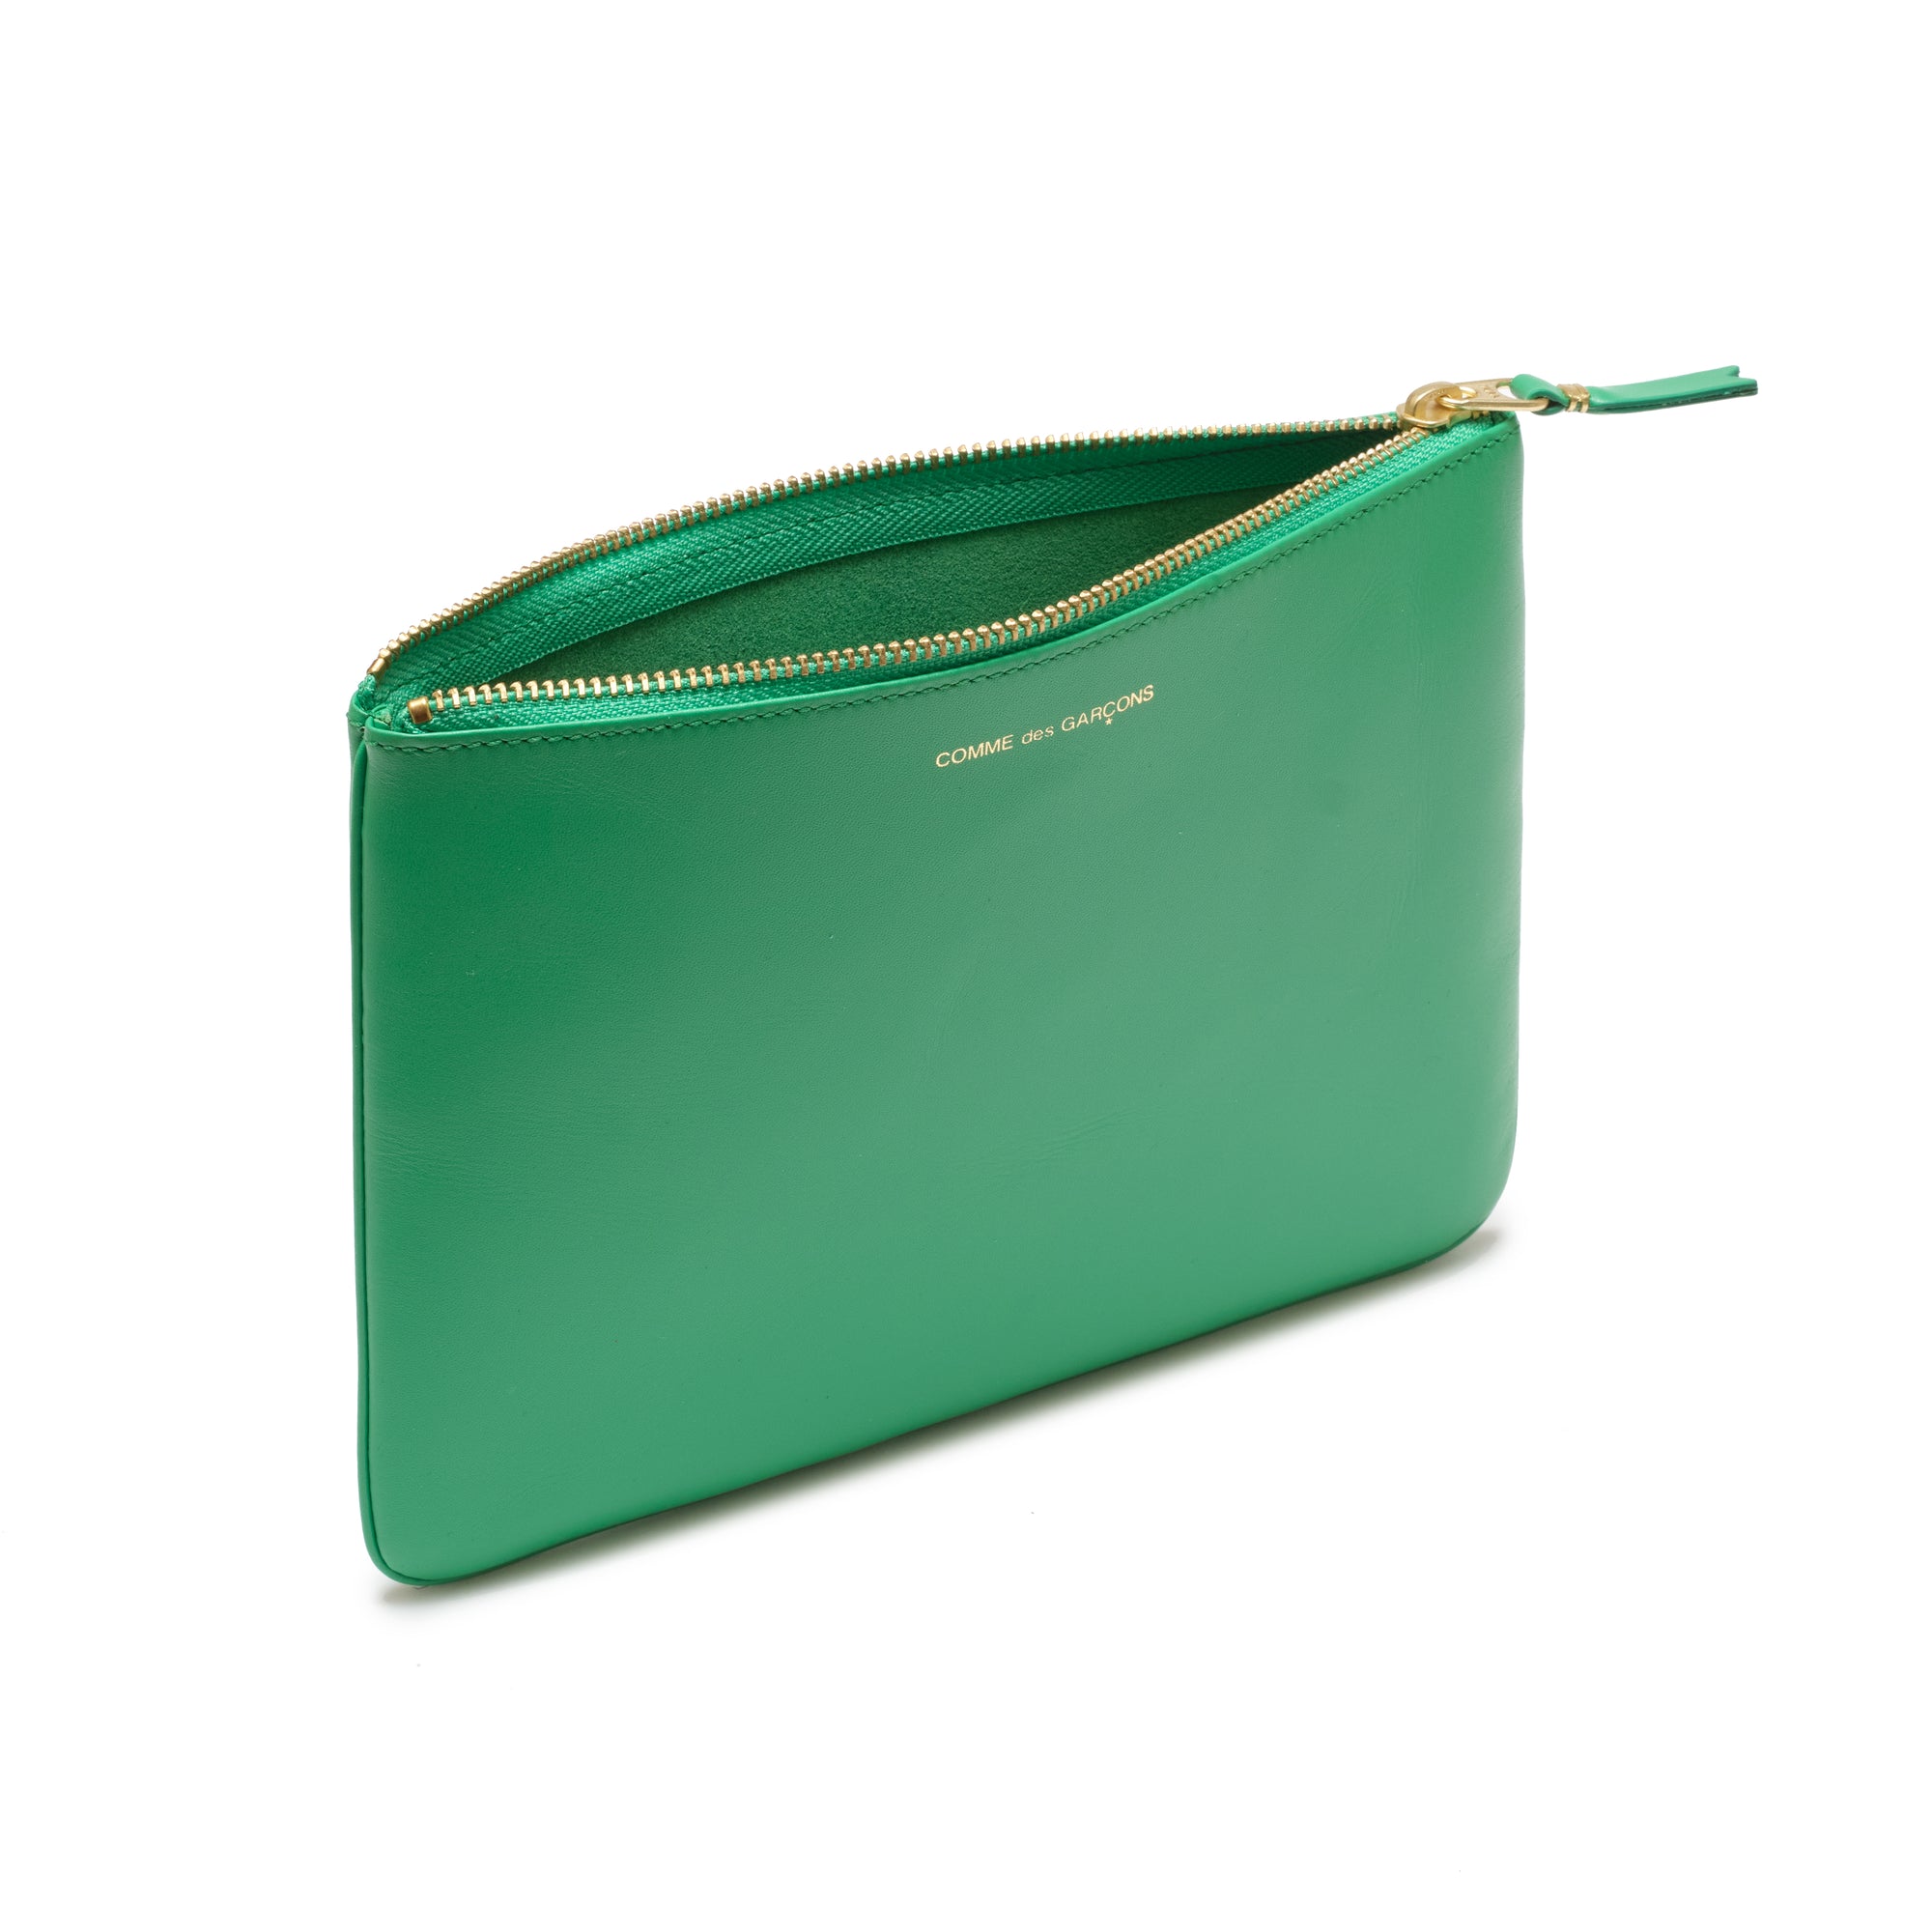 CDG WALLET - Colored Leather Line-A051 - (Green) view 3